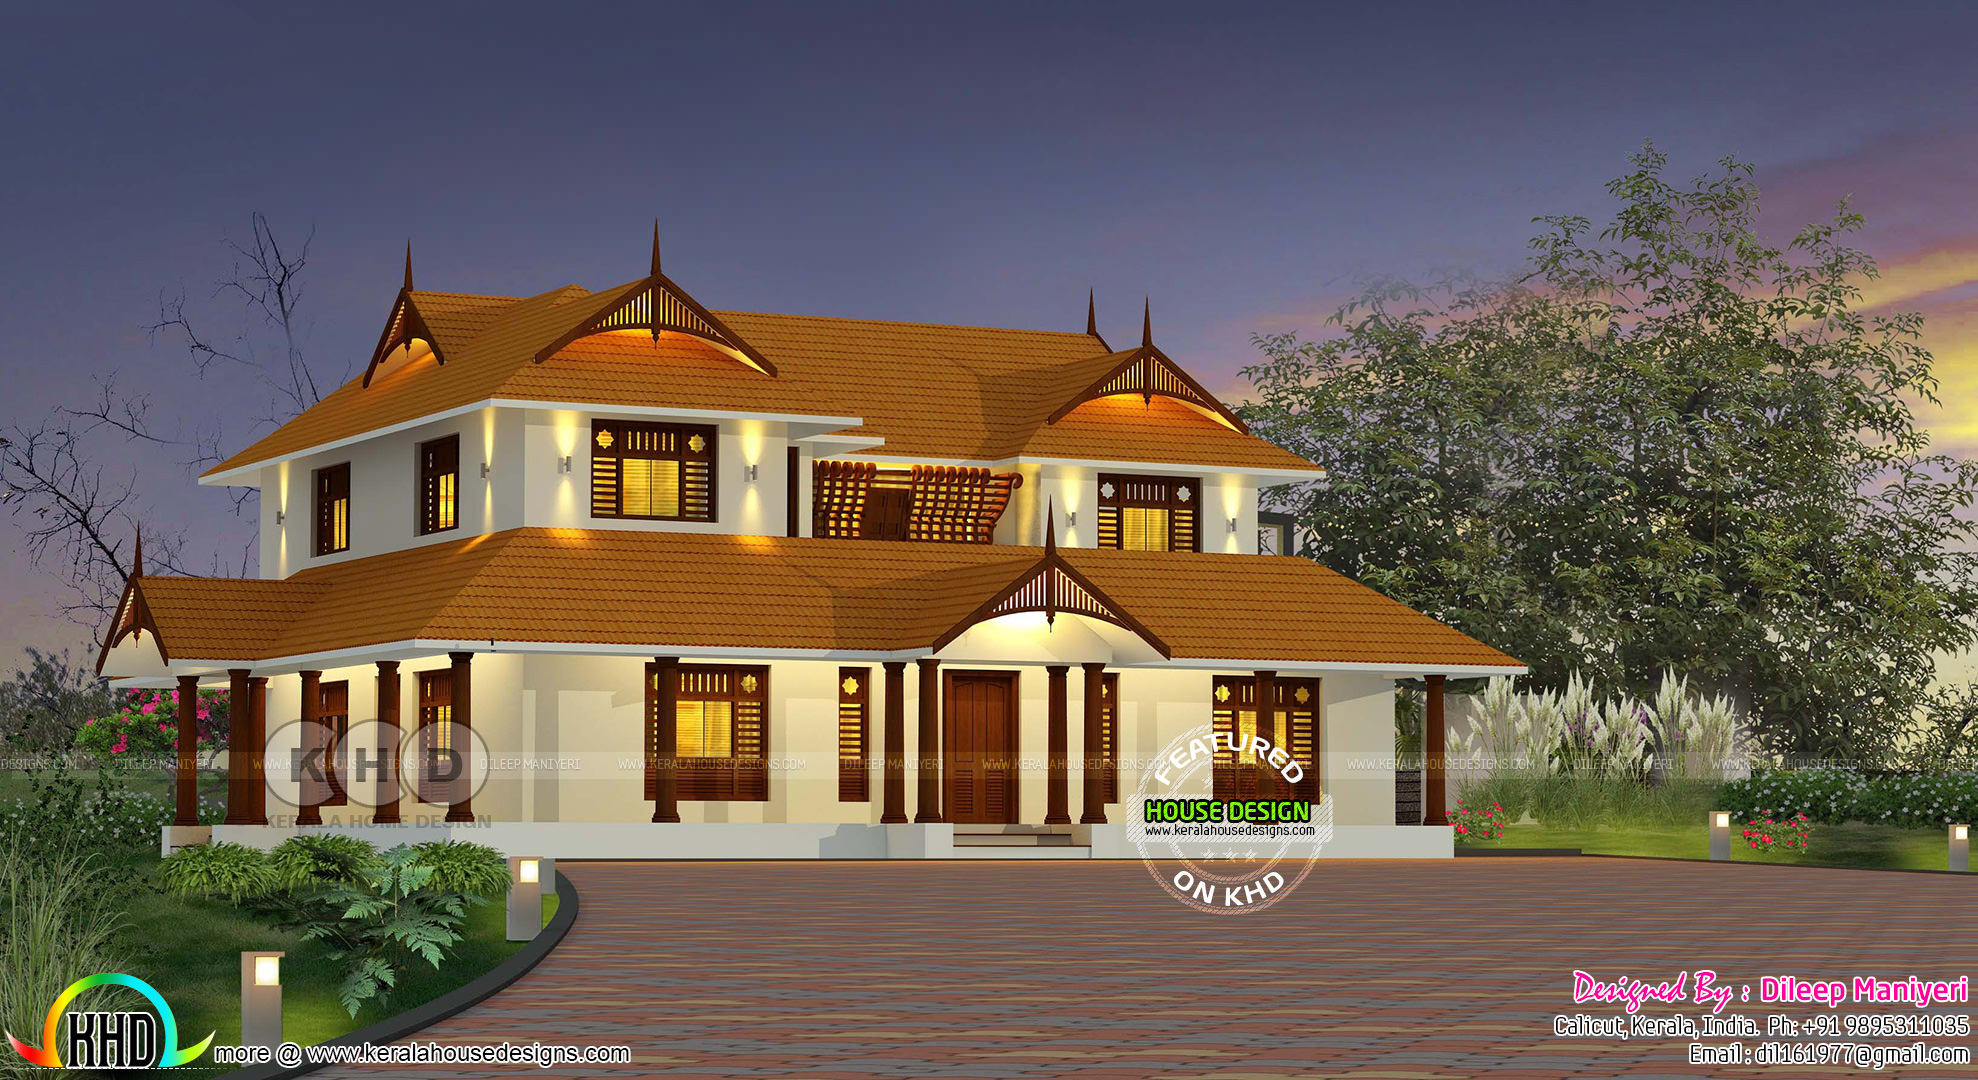 2021 - Kerala home design and floor plans - 8000+ houses